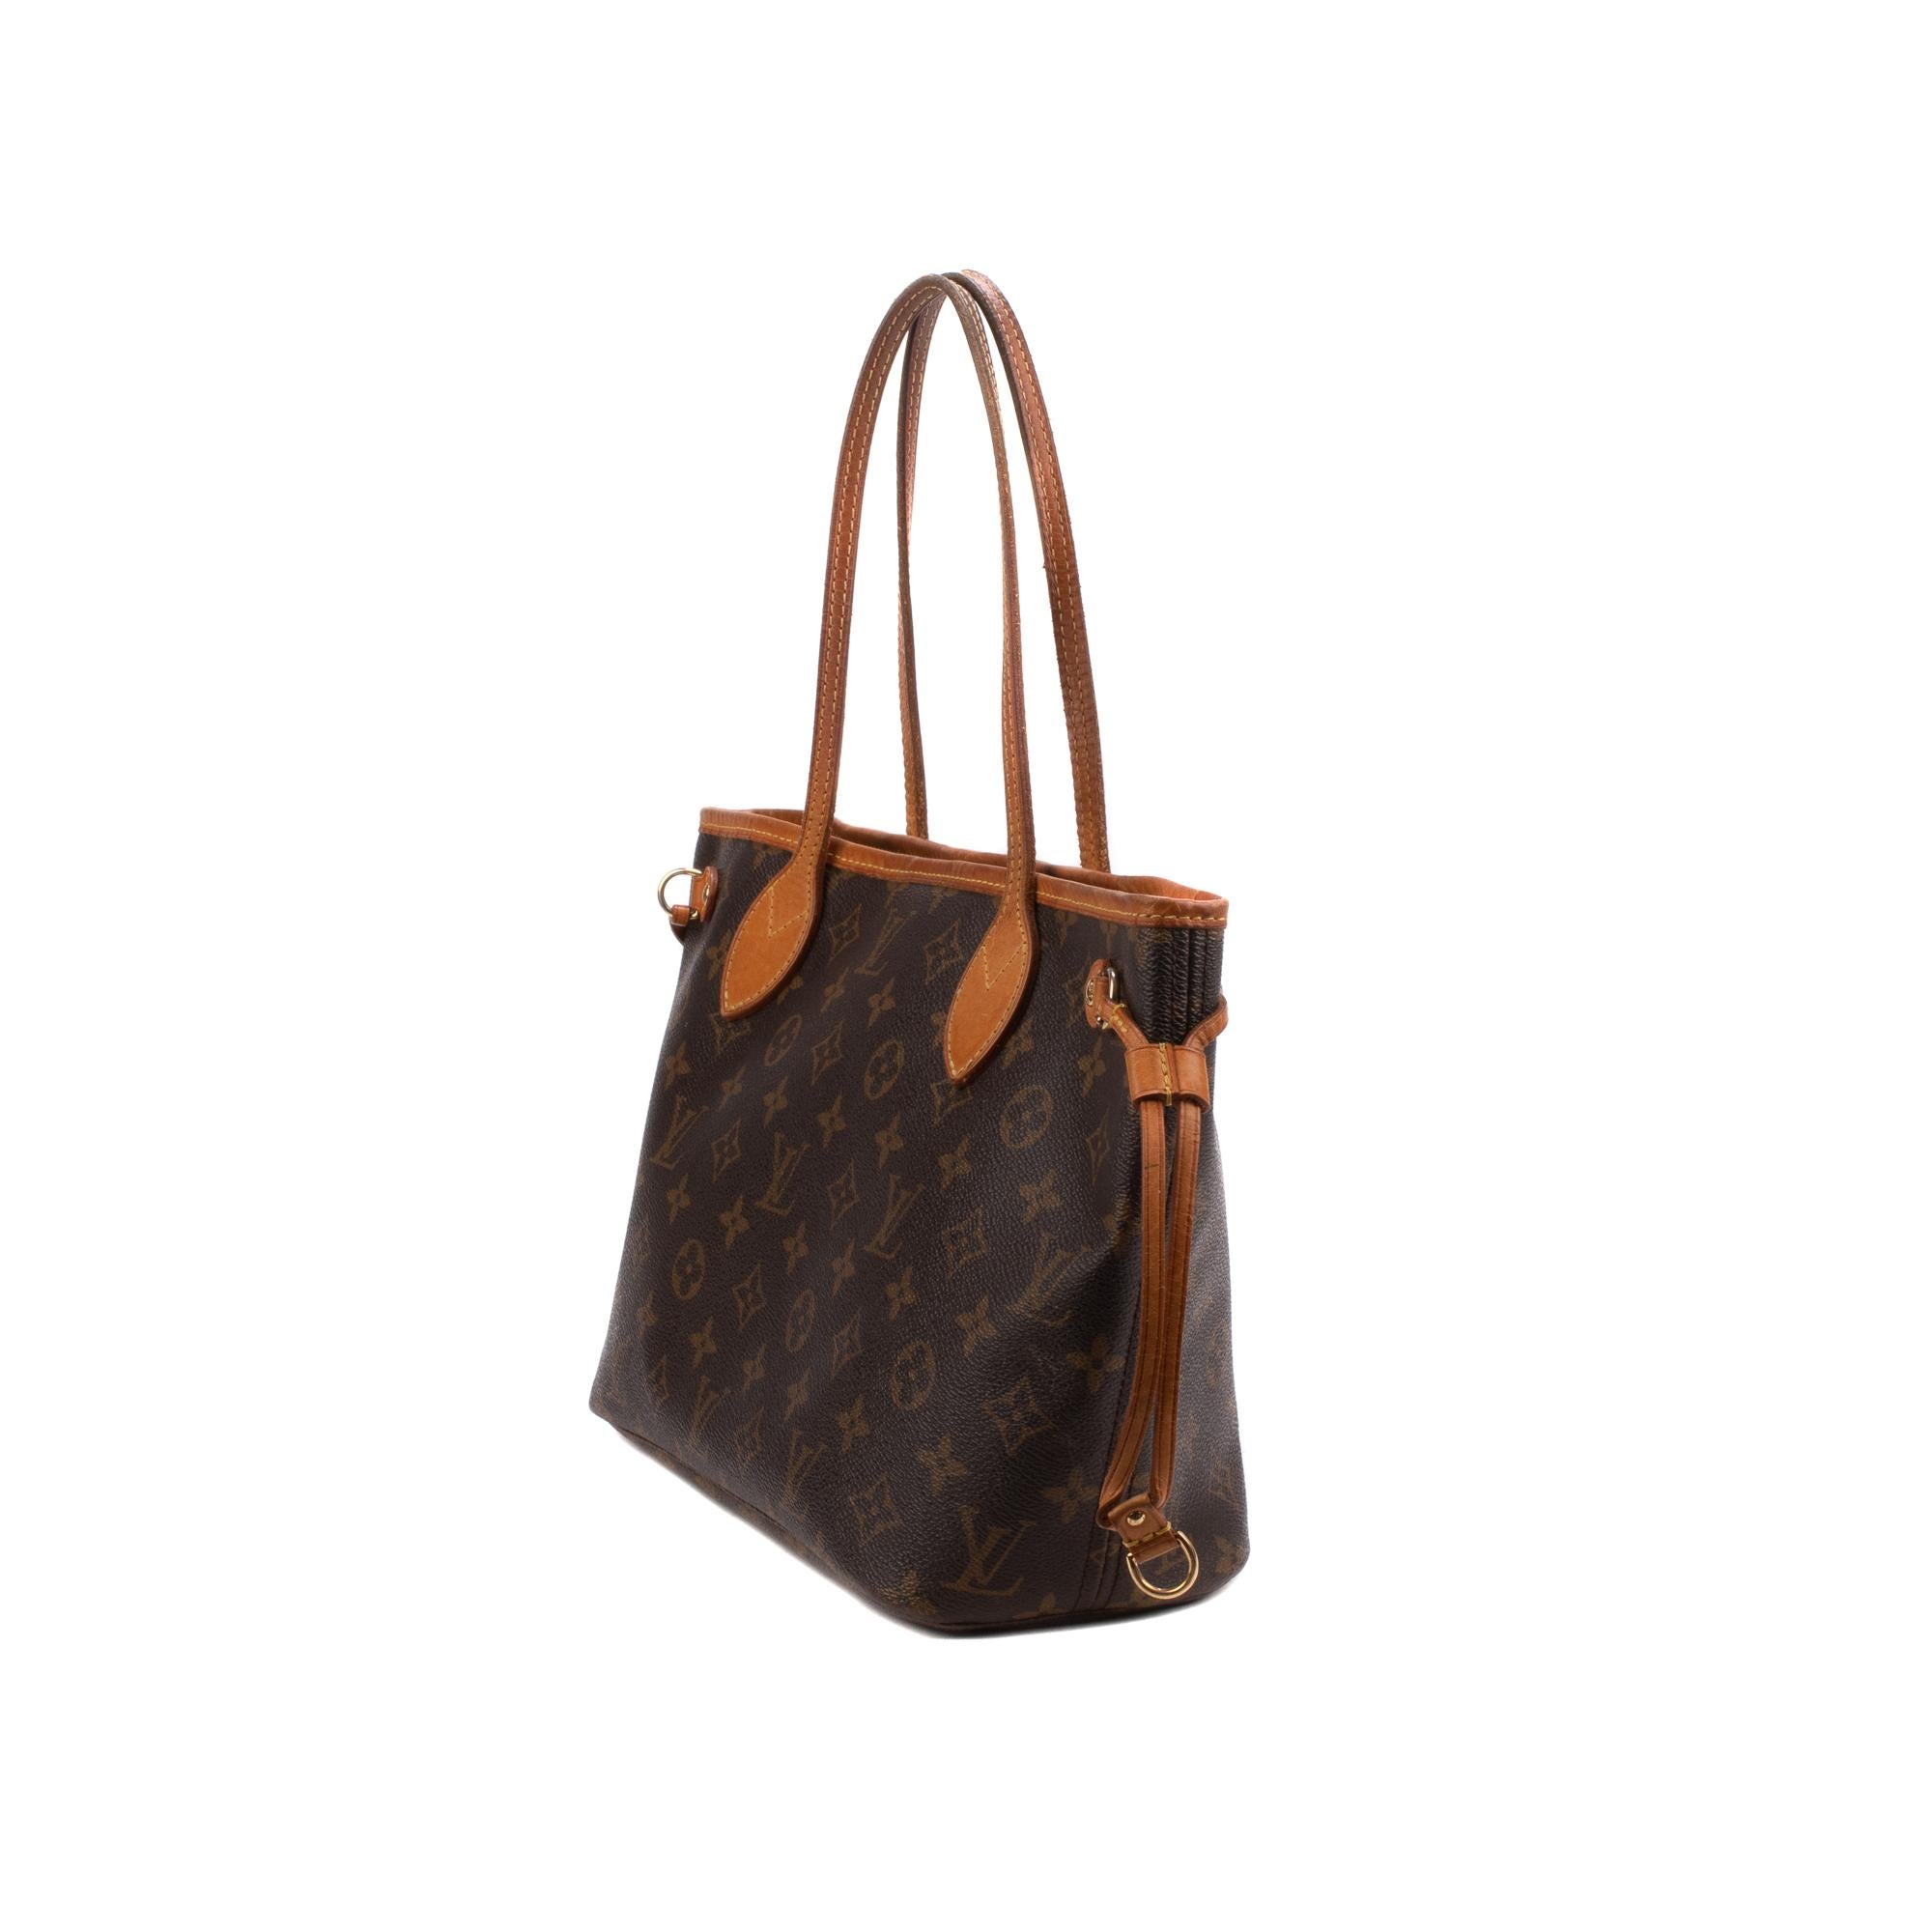 The essential bag Louis Vuitton Neverfull small model (PM) bag in brown monogram canvas and natural leather, gold metal hardware, double handle in natural leather allowing a hand or shoulder carry.

Closure by clamping tab.
Beige canvas lining,